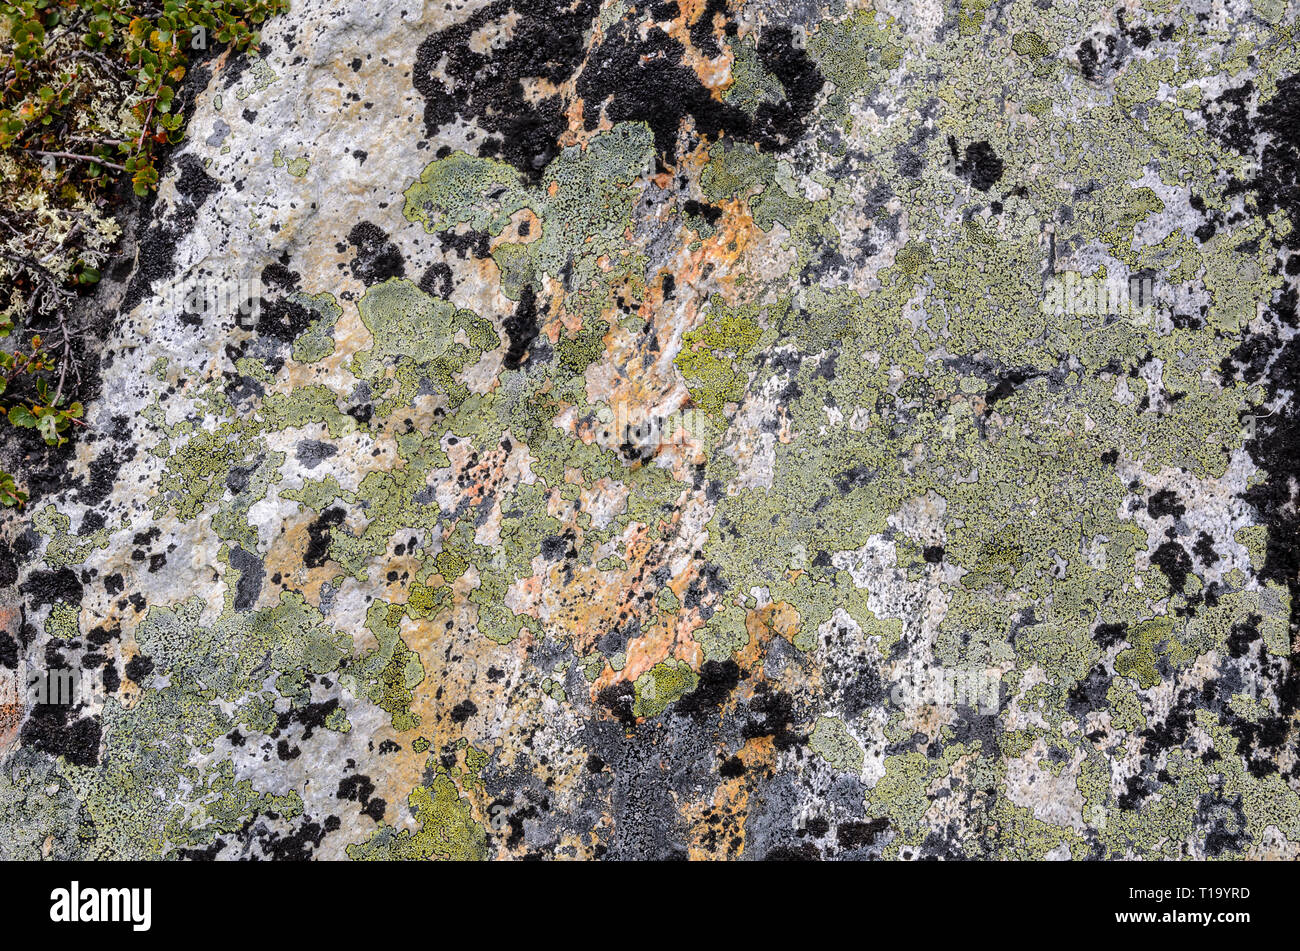 Stone surface covered with lichen and moss Stock Photo